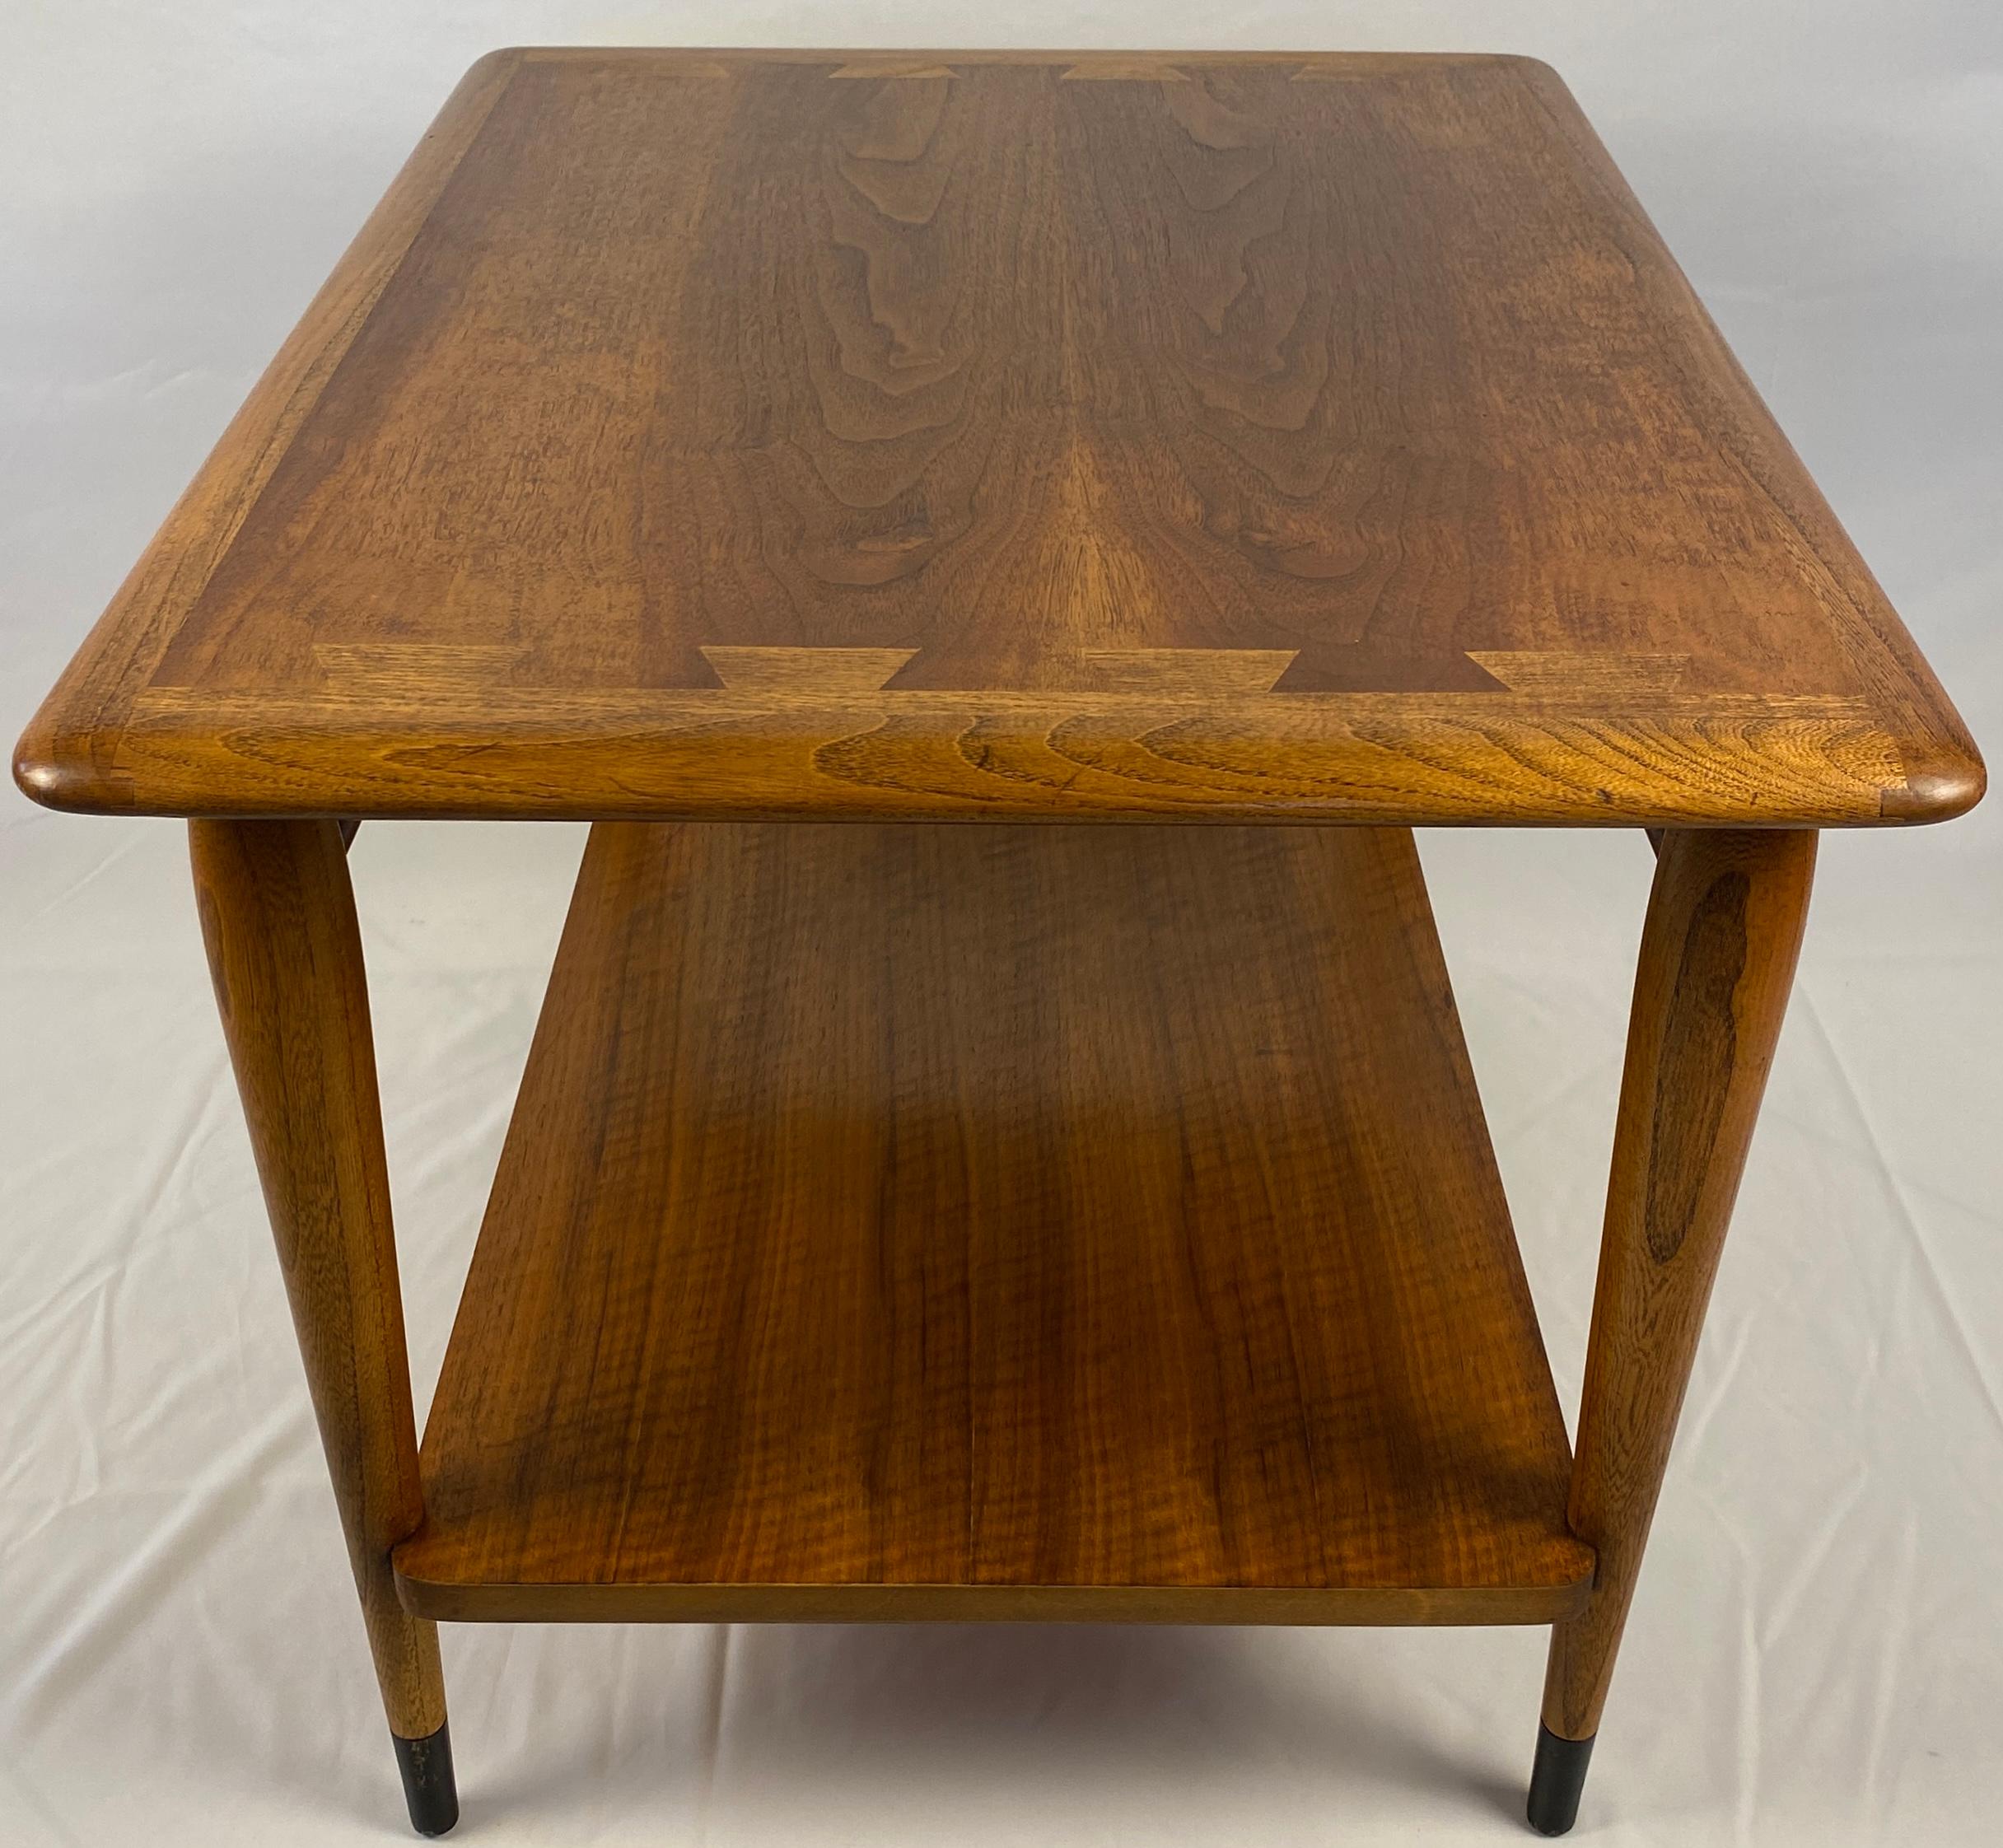 Danish Scandinavian Style Wooden Coffee Table or End Table with Bottom Shelf For Sale